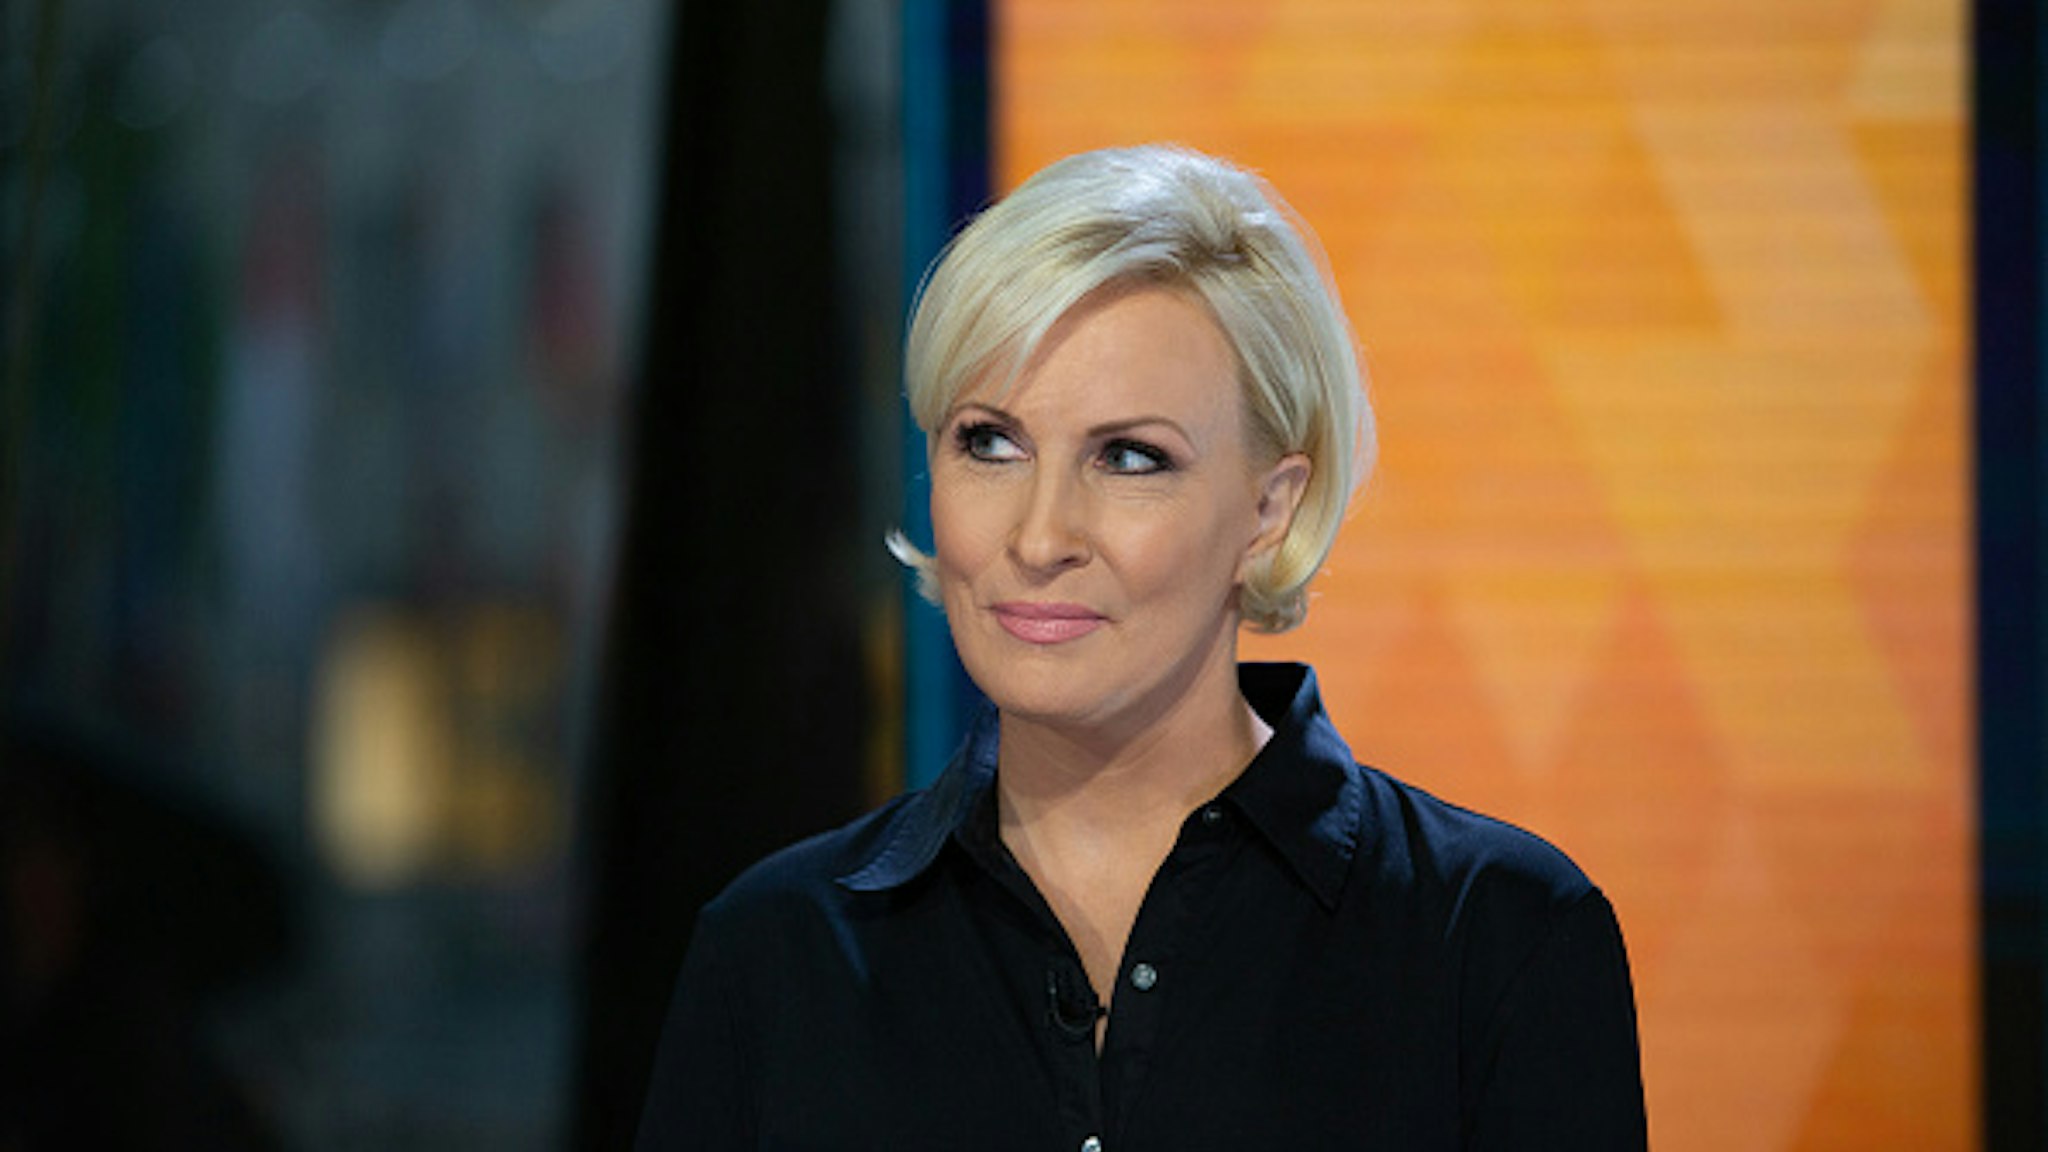 TODAY -- Pictured: Mika Brzezinski on Tuesday, September 25, 2018 --